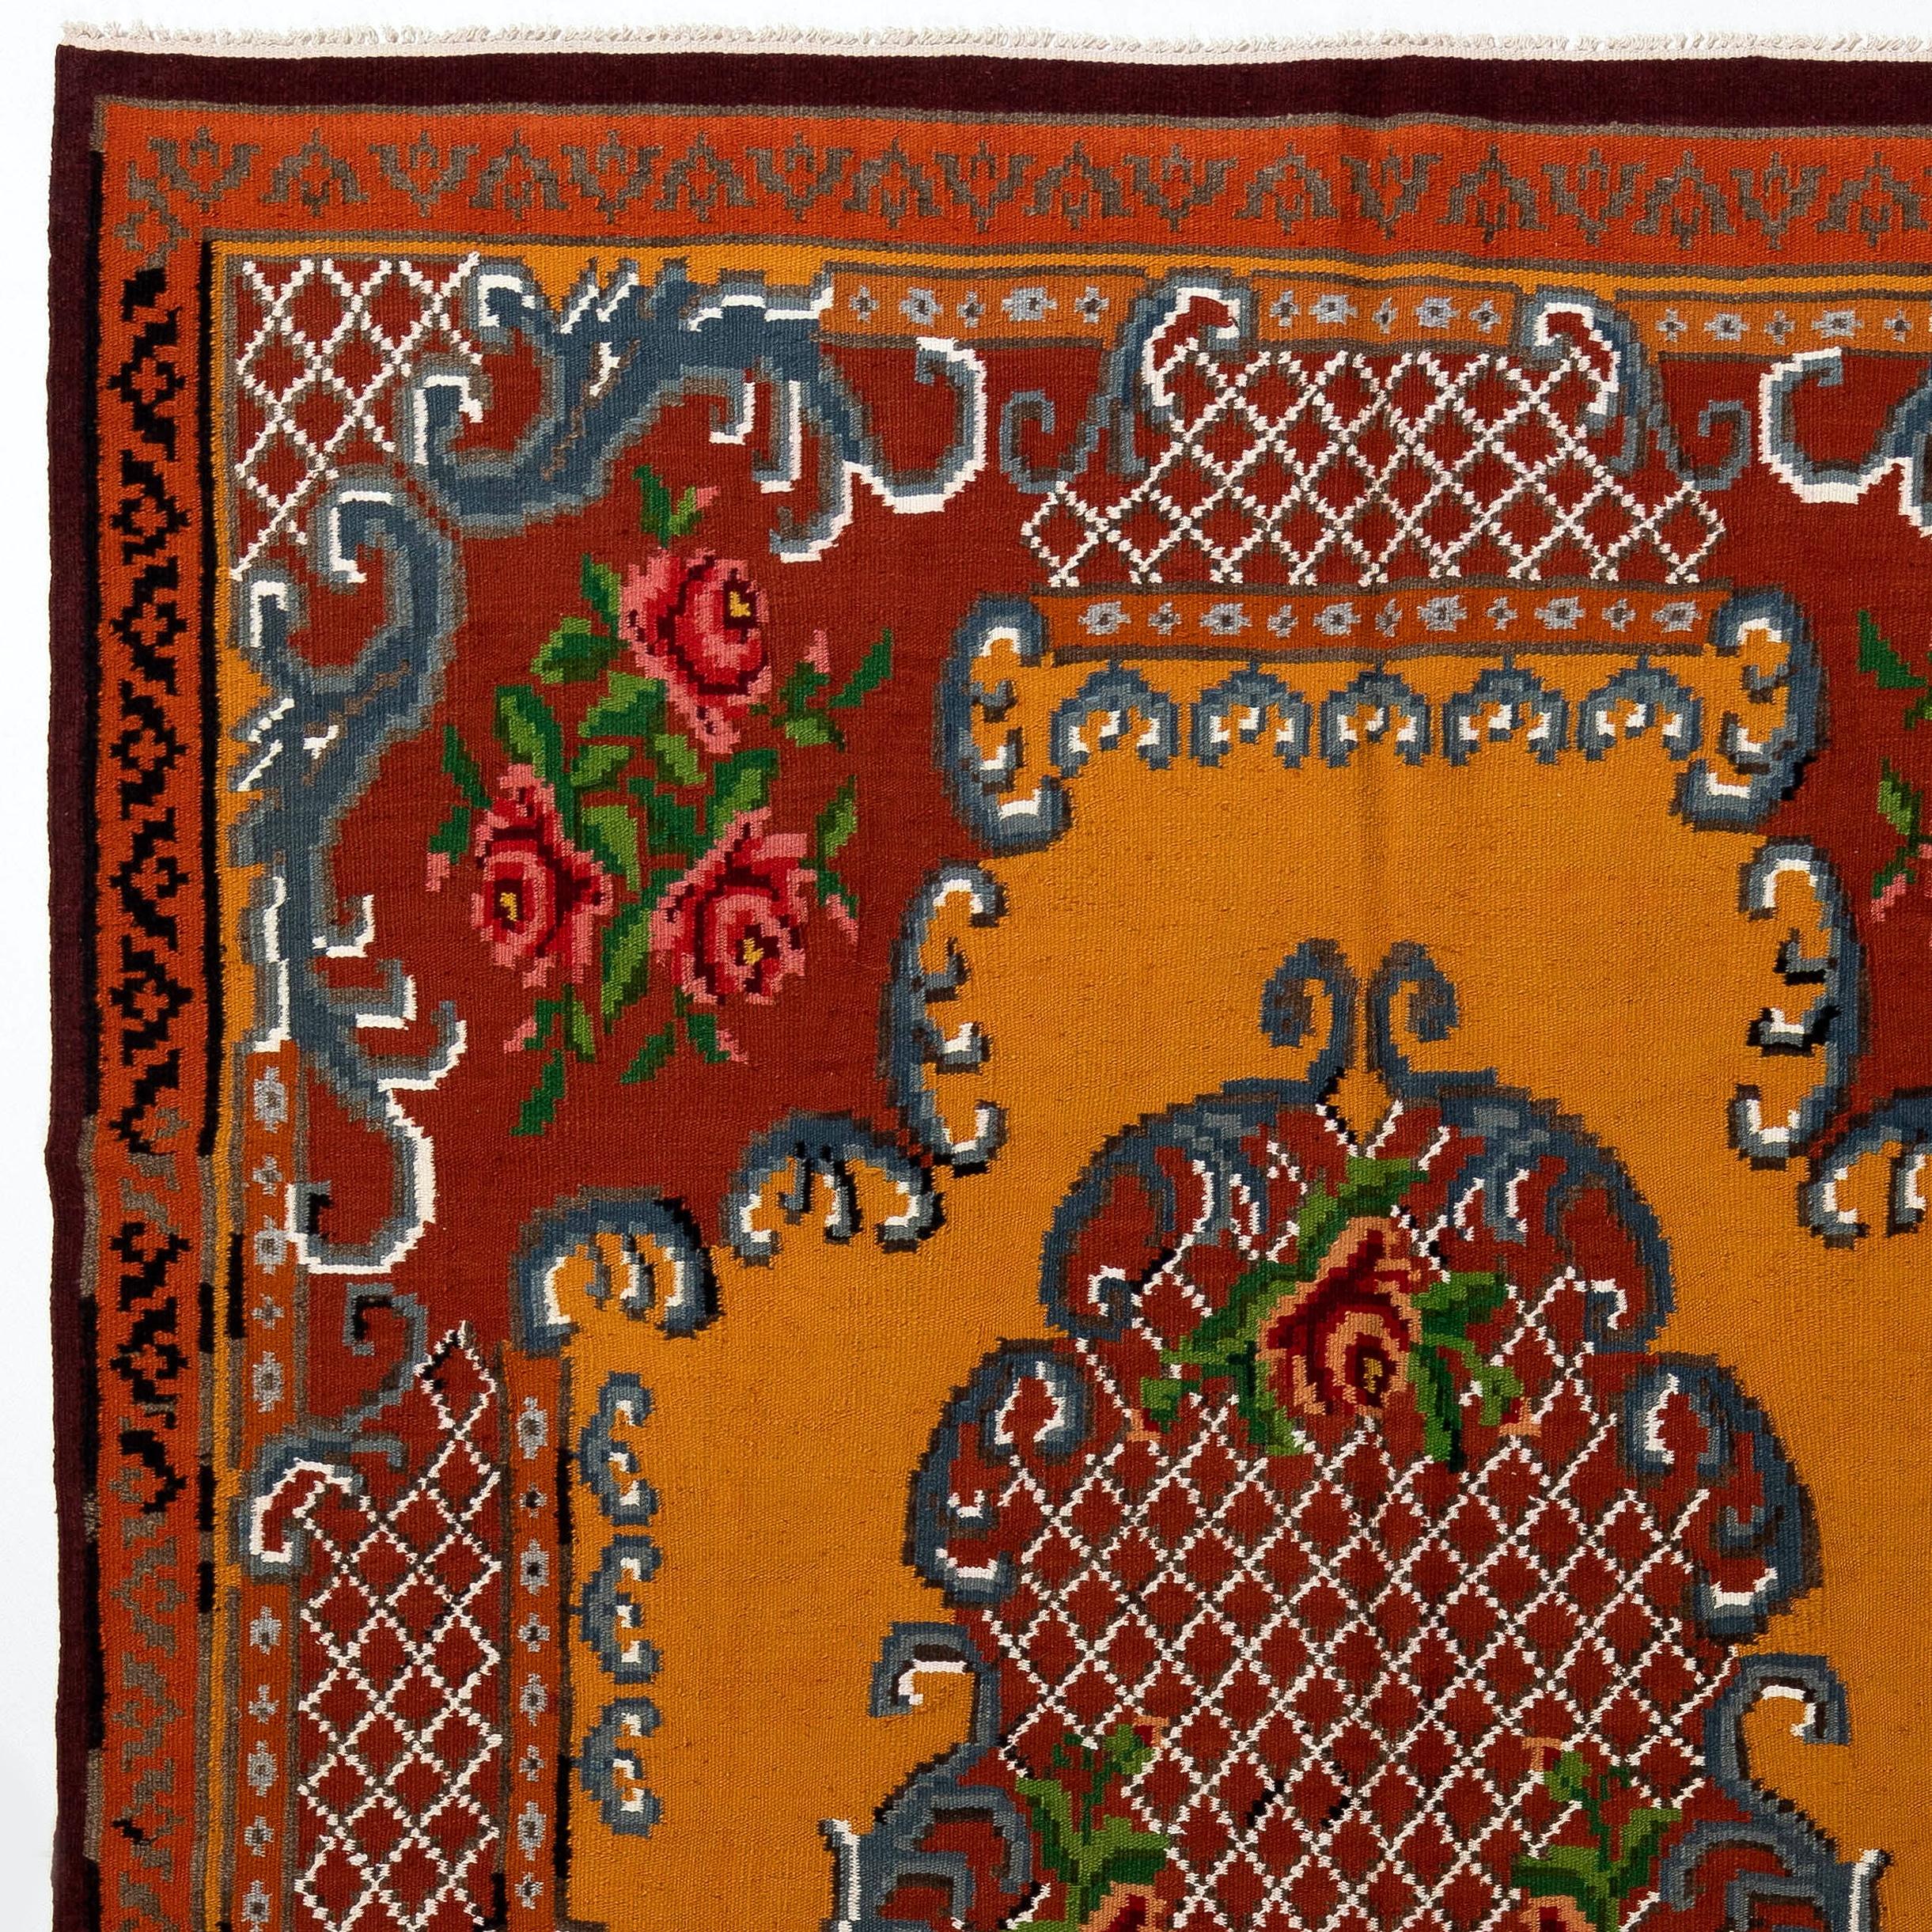 One of a kind vintage Bessarabian Kilim. 
A handwoven Eastern European rug from Moldova. These traditional Moldovan flat-weaves are inspired from vintage Aubusson carpets but they are distinguished with their black grounds, large floral patterns in